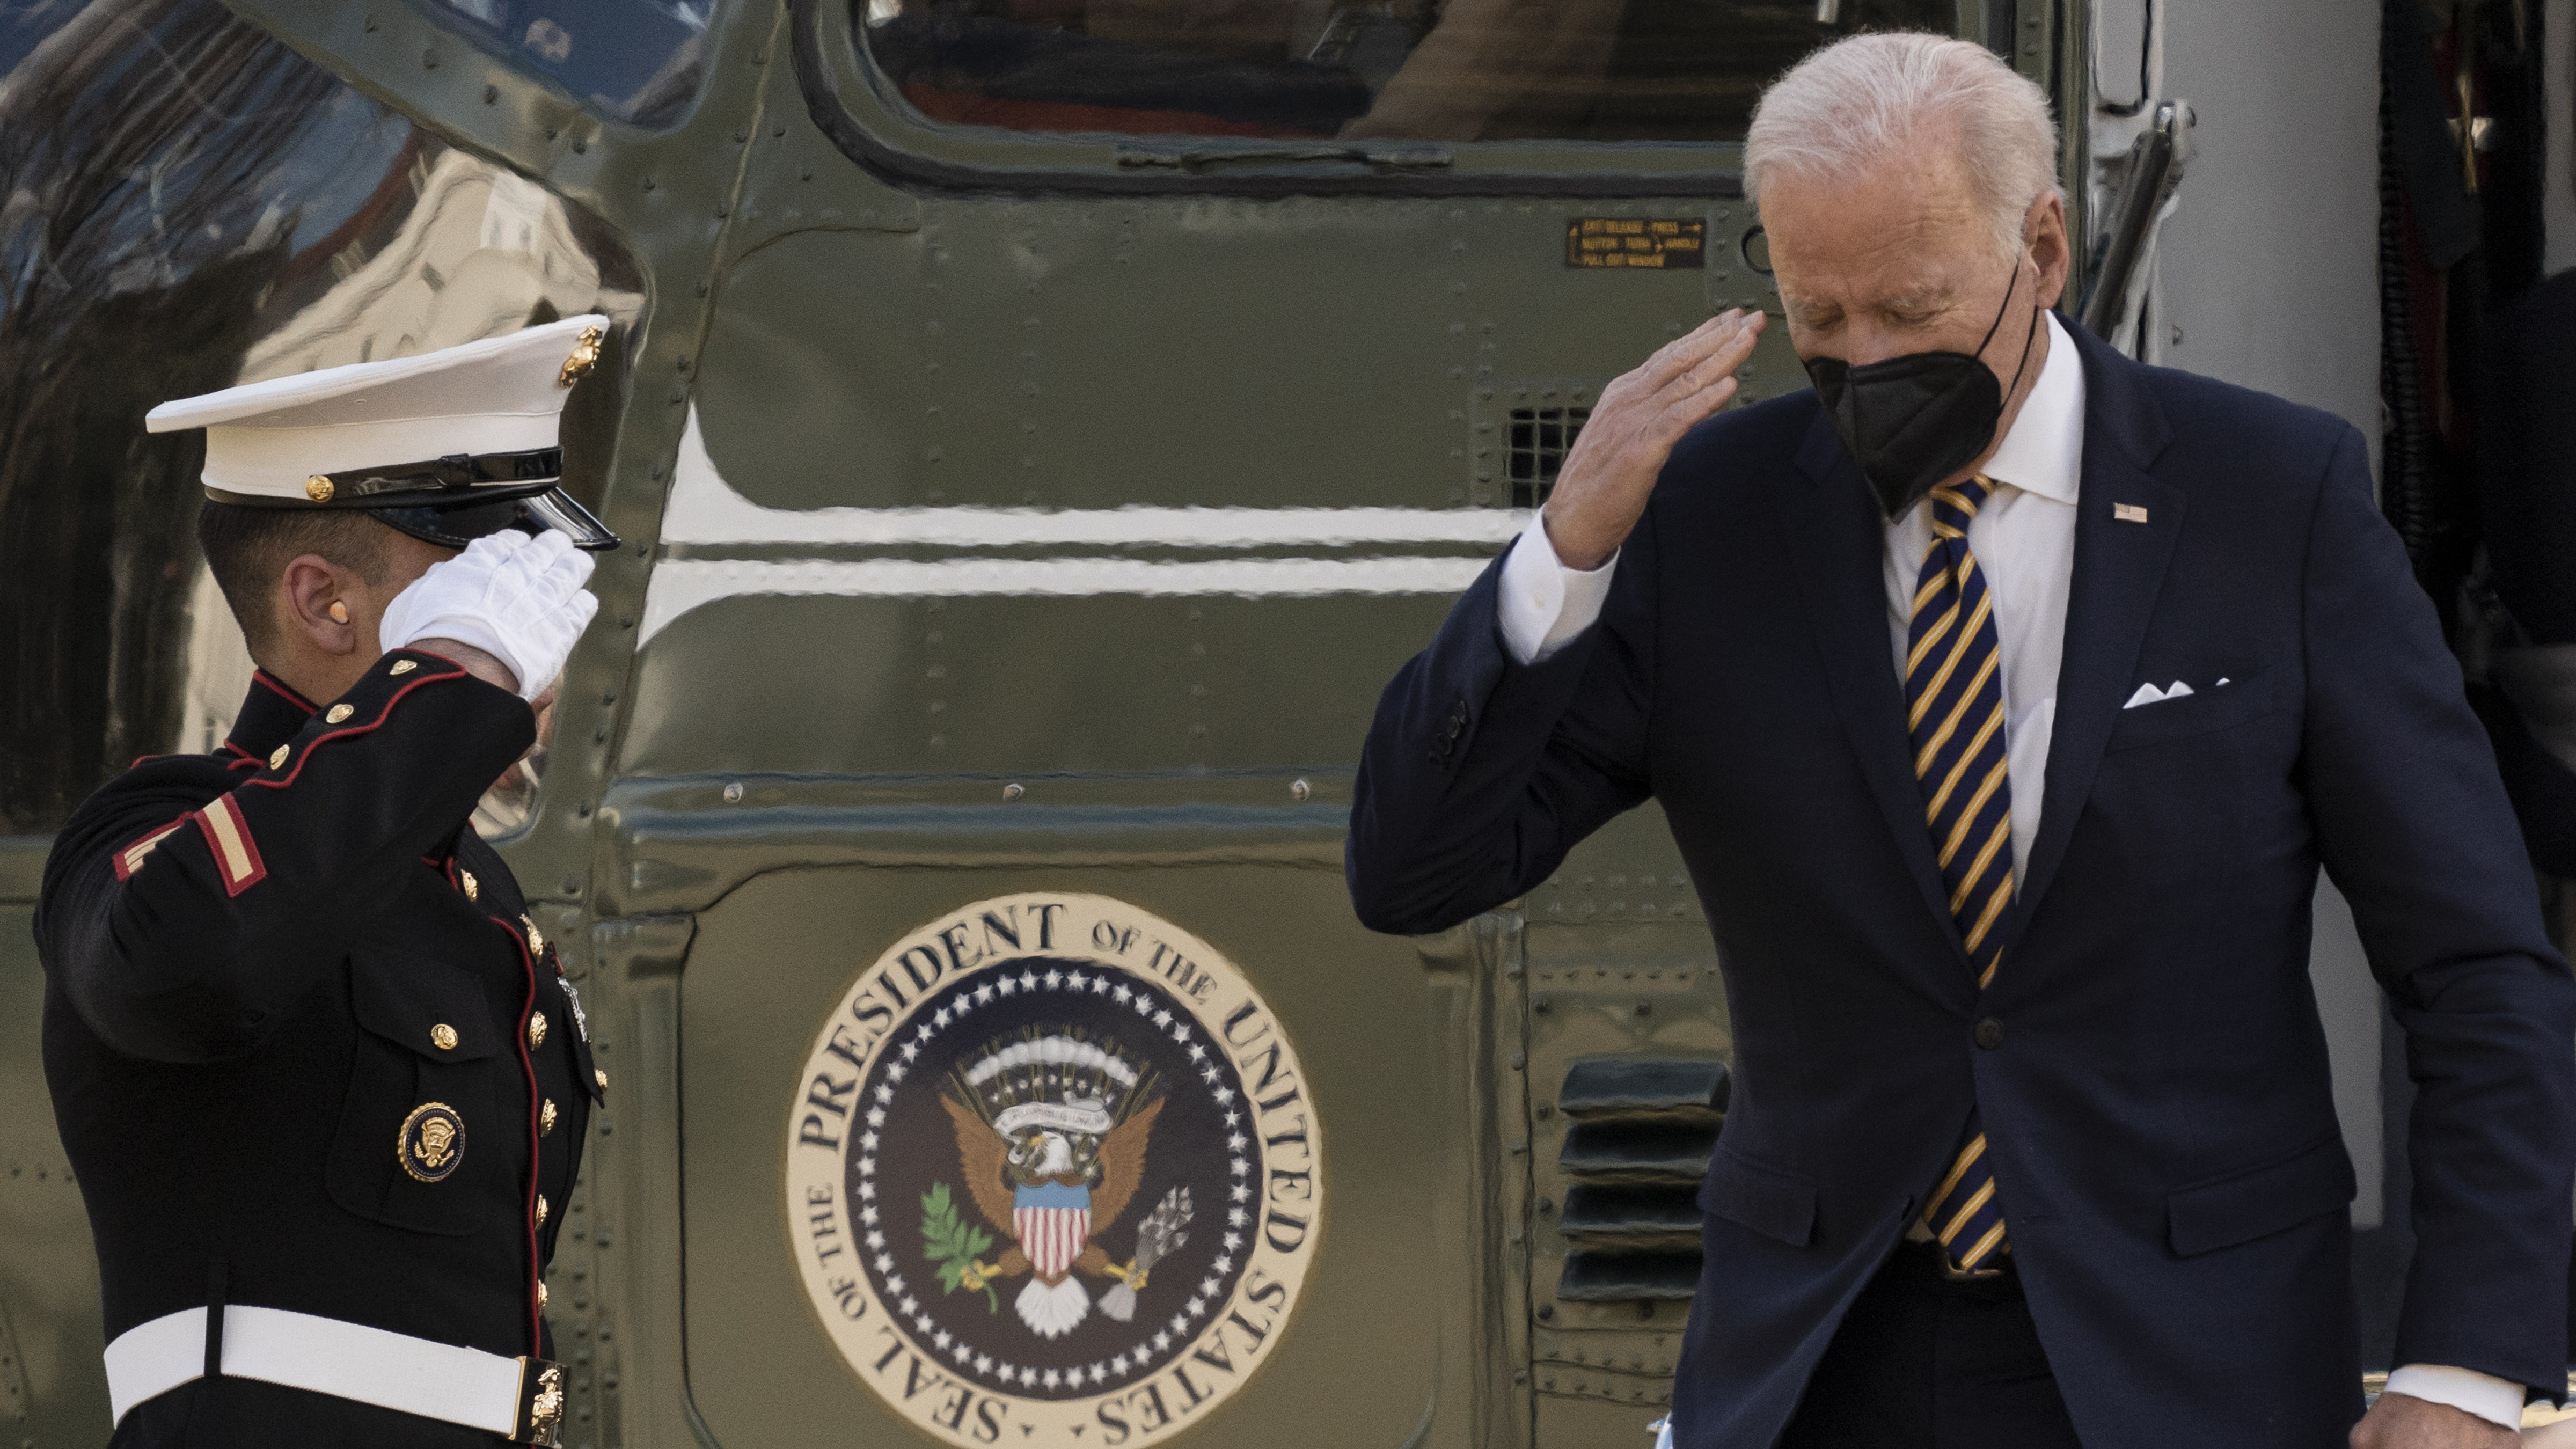 Joe Biden salutes after arriving on Marine One on the South Lawn of the White House